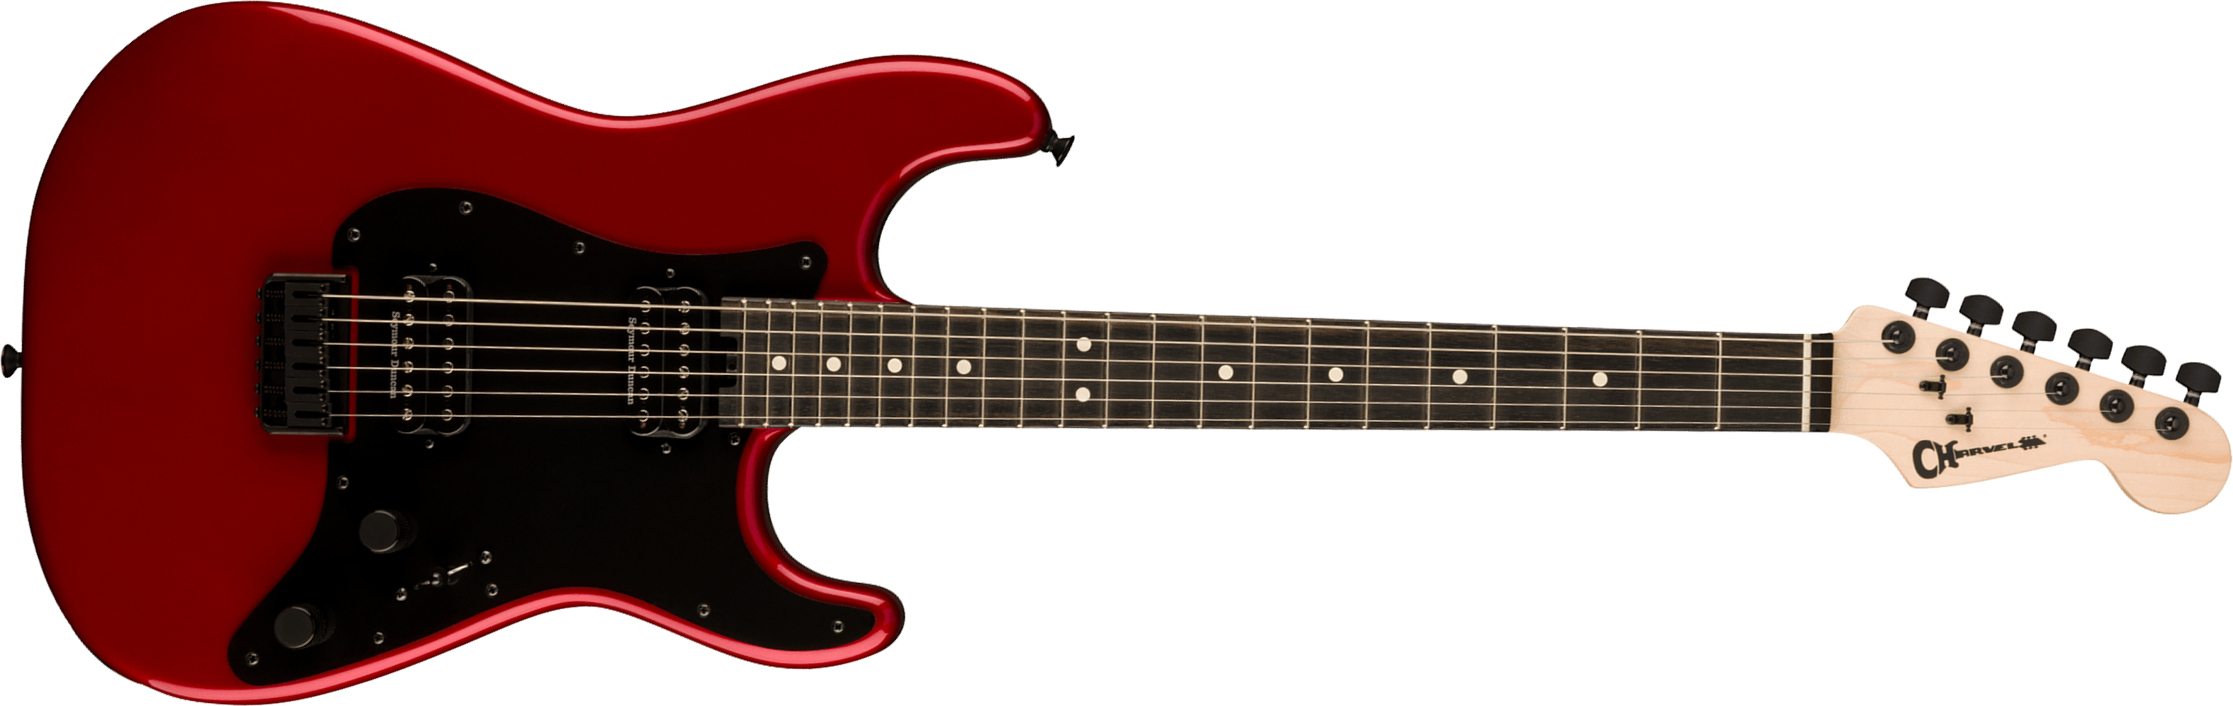 Charvel So-cal Style 1 Hh Ht E Pro-mod 2h Seymour Duncan Eb - Candy Apple Red - E-Gitarre in Str-Form - Main picture